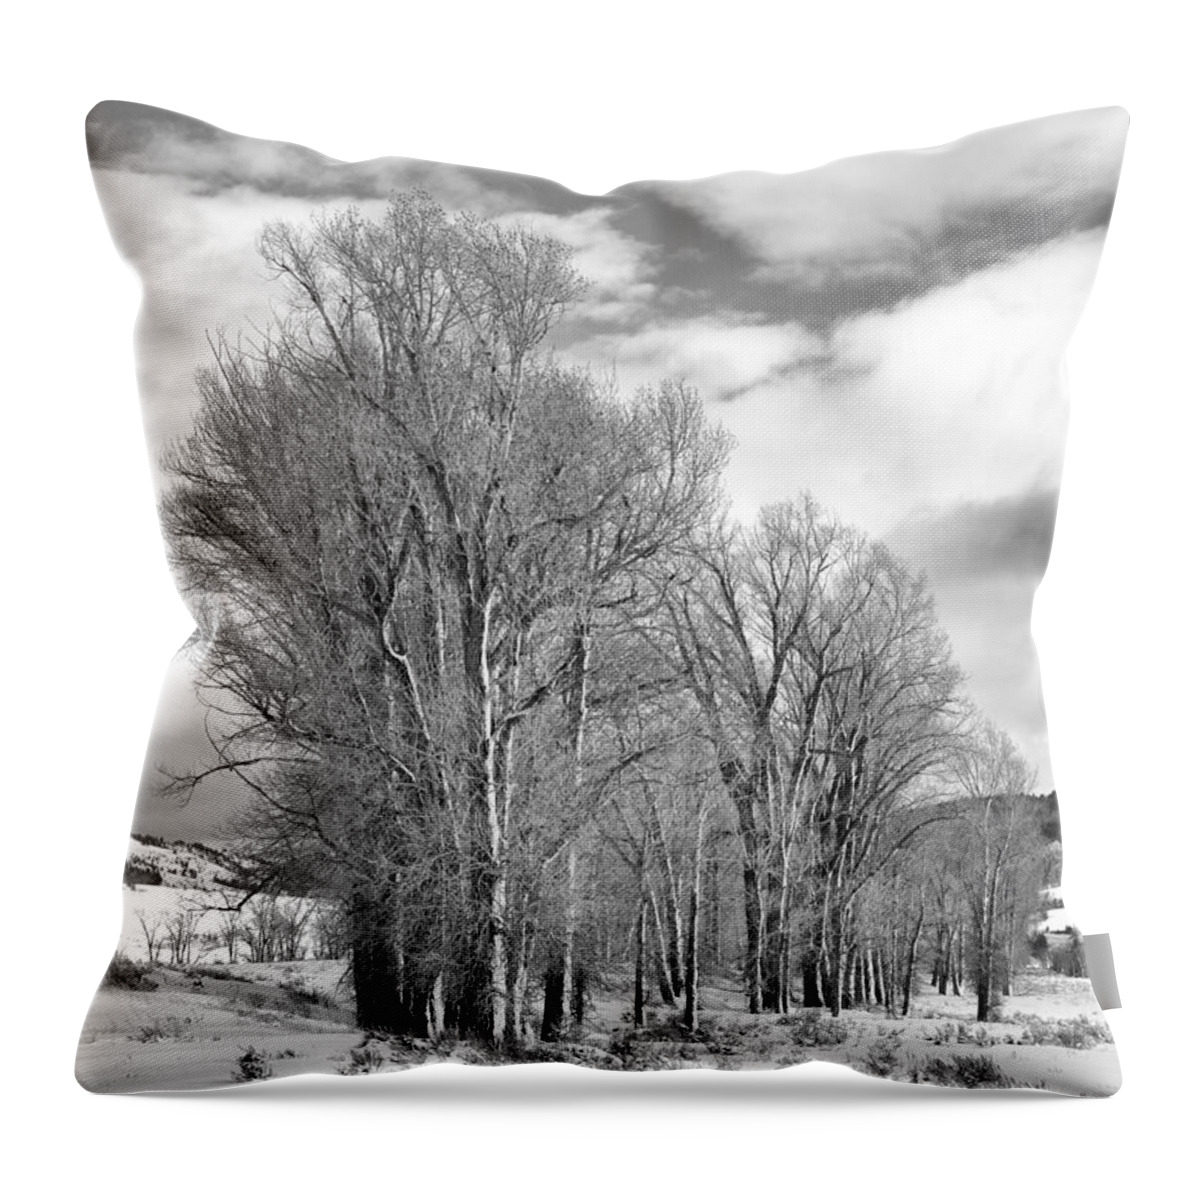 Black & White Throw Pillow featuring the photograph Peaceful Moments #1 by Sandra Bronstein